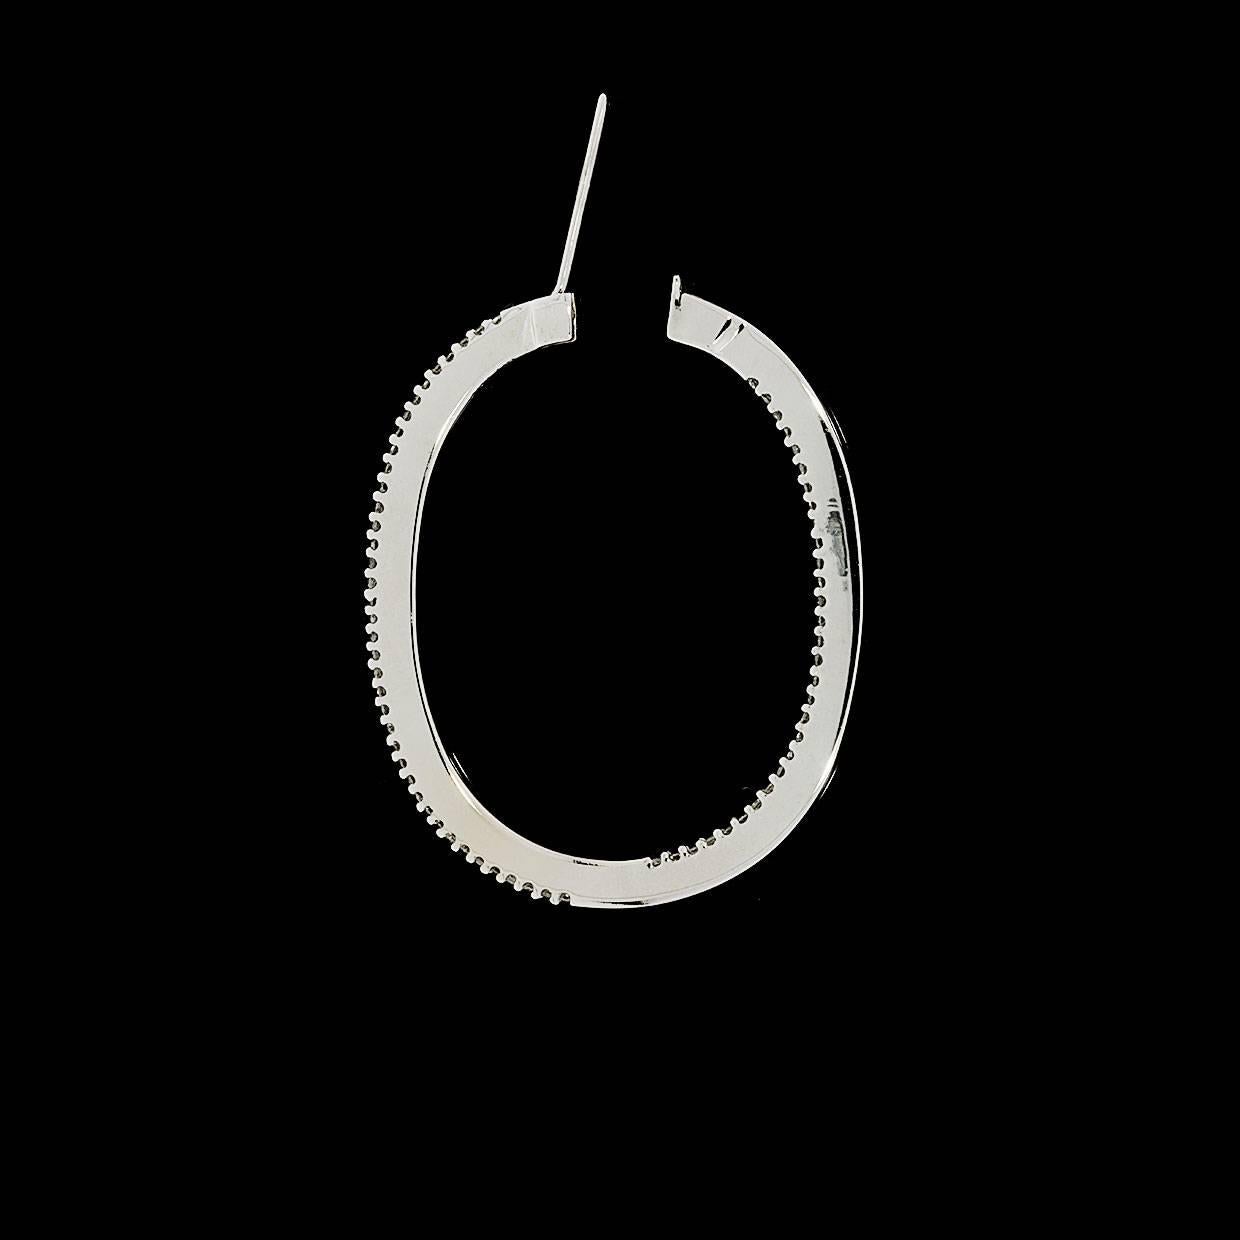 These timeless, versatile earrings have a total weight of 1 carat. Beautiful round brilliant diamonds are shared prong set in 14 karat white gold, oval shaped, inside out style hoop earrings. The diamonds are HIJ/SI2-I1 in quality. The earrings